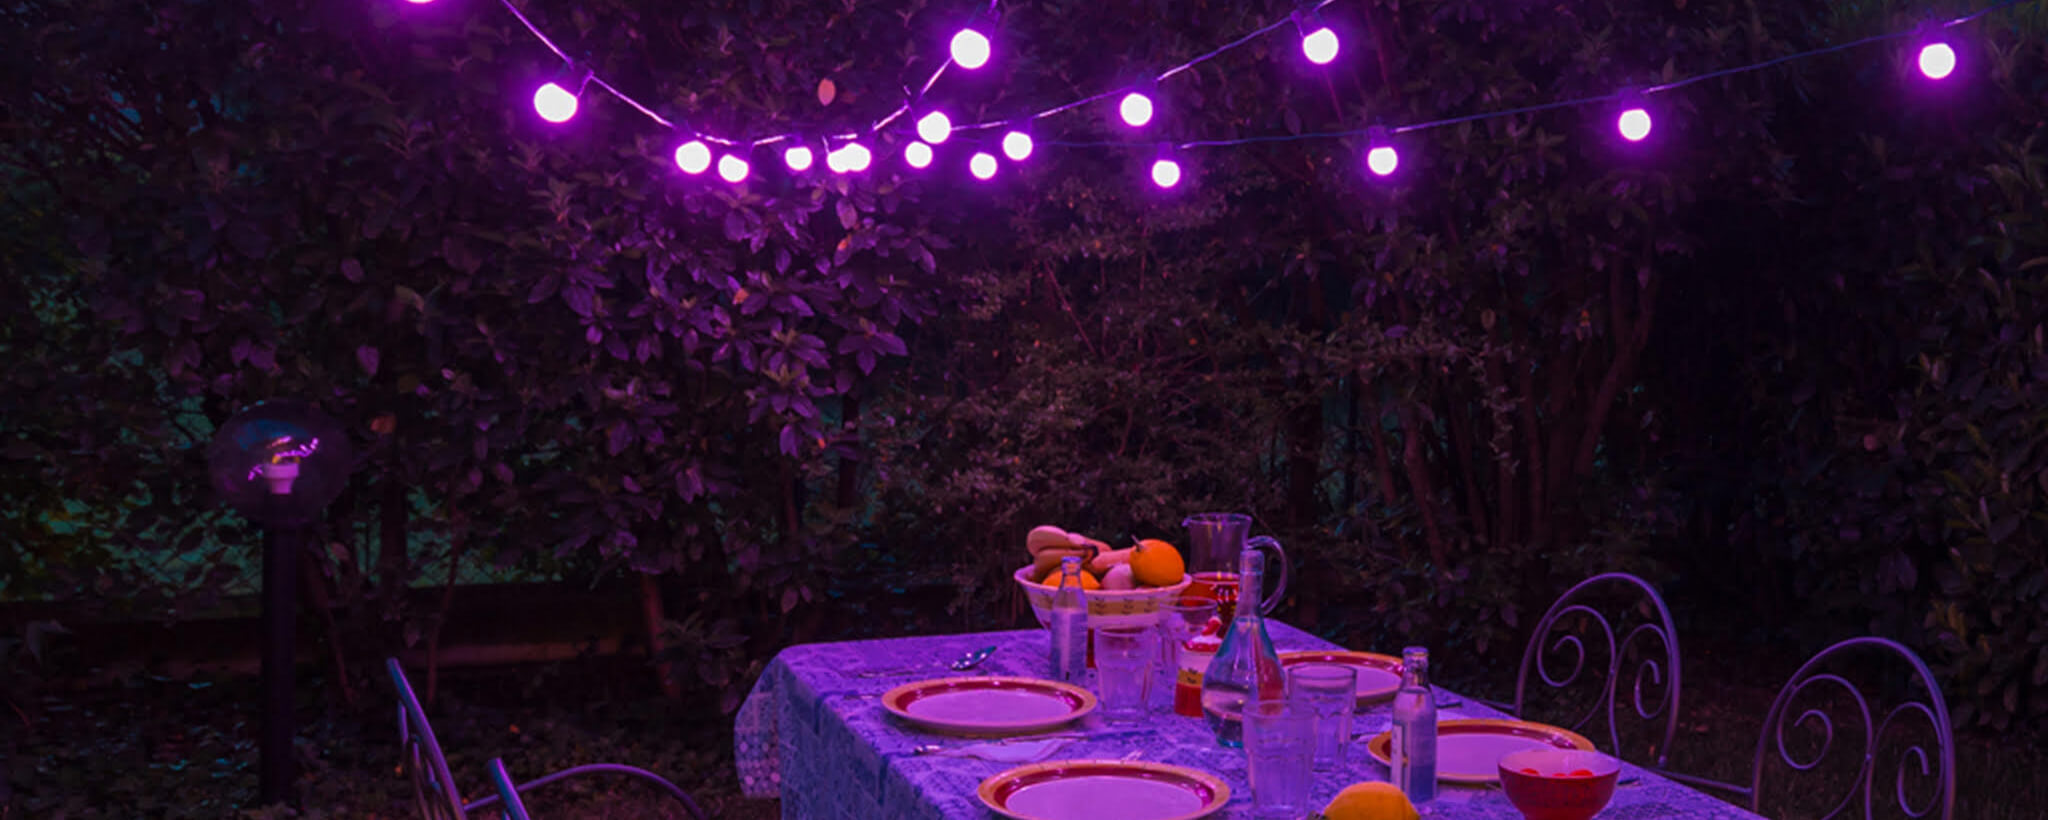 Twinkly Purple Lights over Table